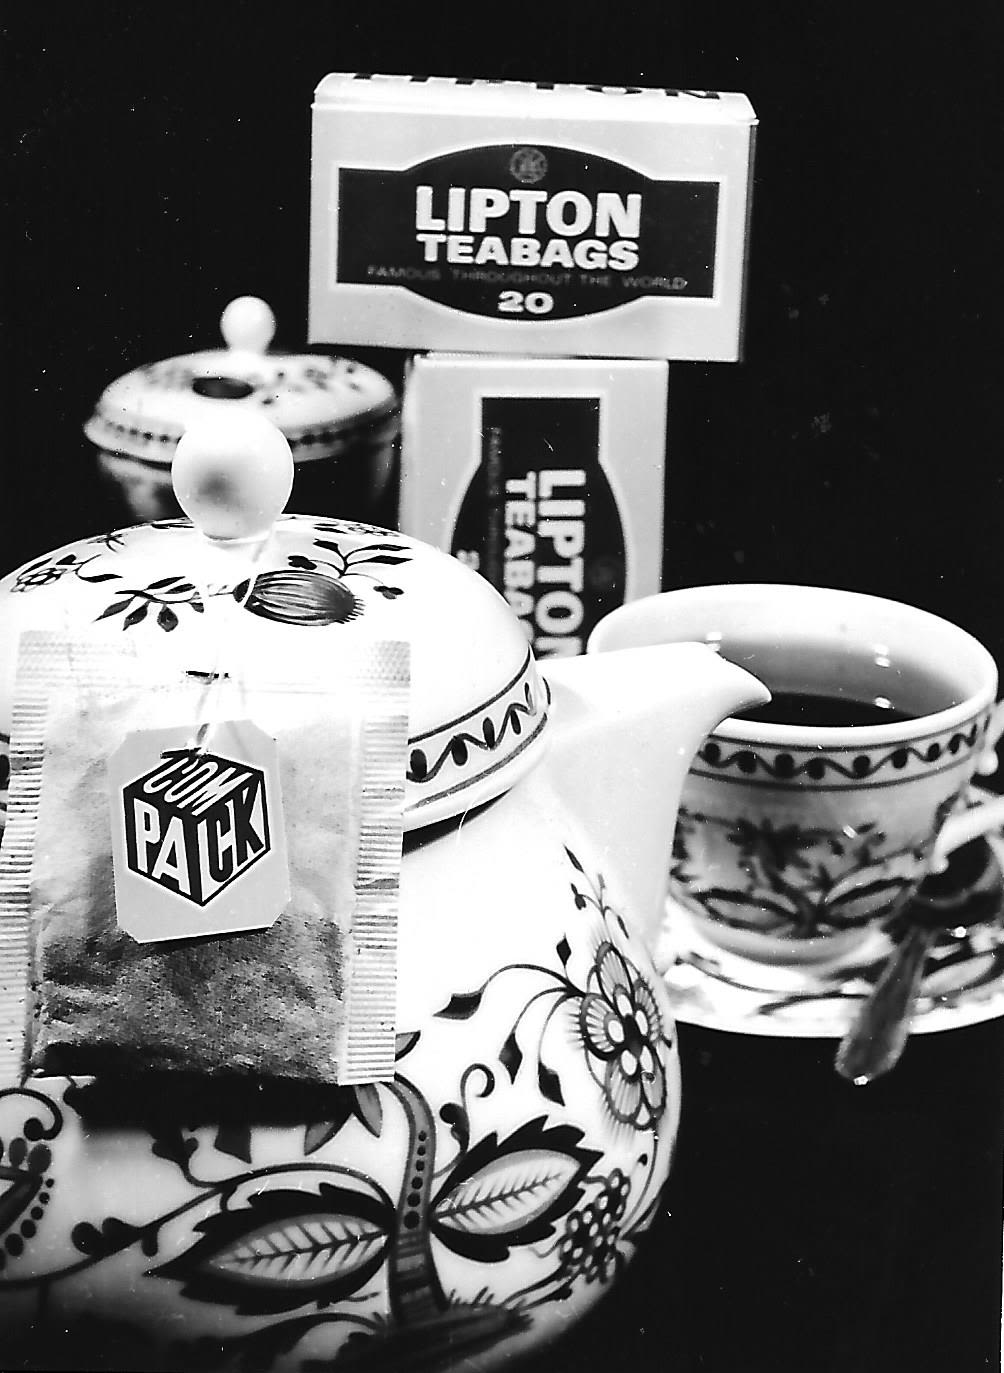 a black and white photograph of a teapot and teacup filled with tea. A tea bag hangs out of the teapot, prominently showing the label which shows the Compack tea company logo. In the background stand boxes of tea bags with the words 'Lipton teabags' on them.